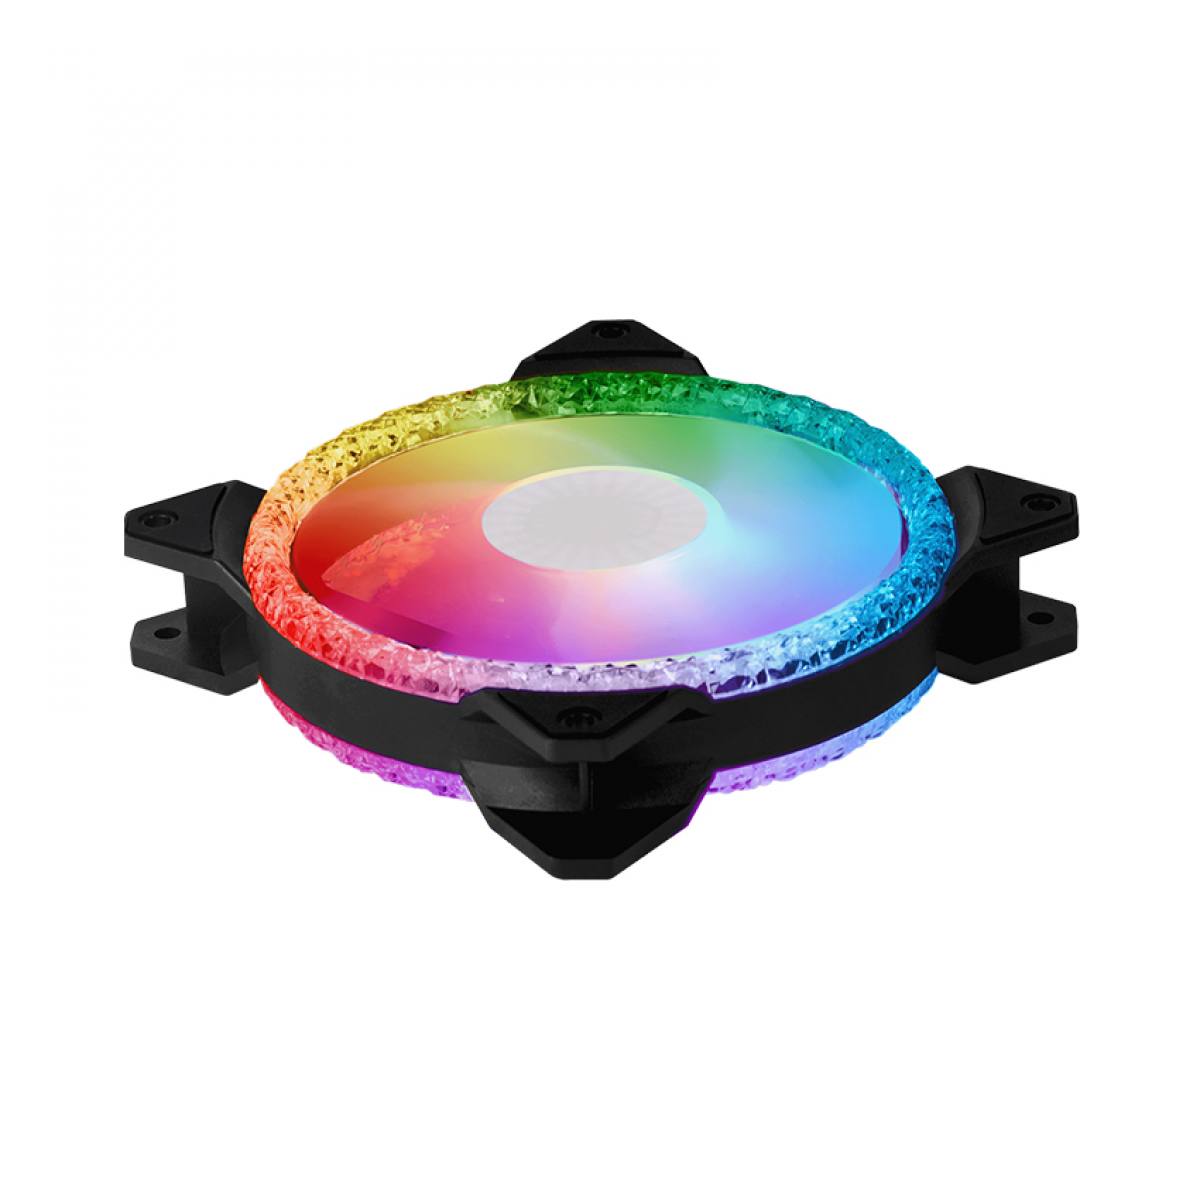 Tản Nhiệt Cooler Master MF120 Prismatic 3in1